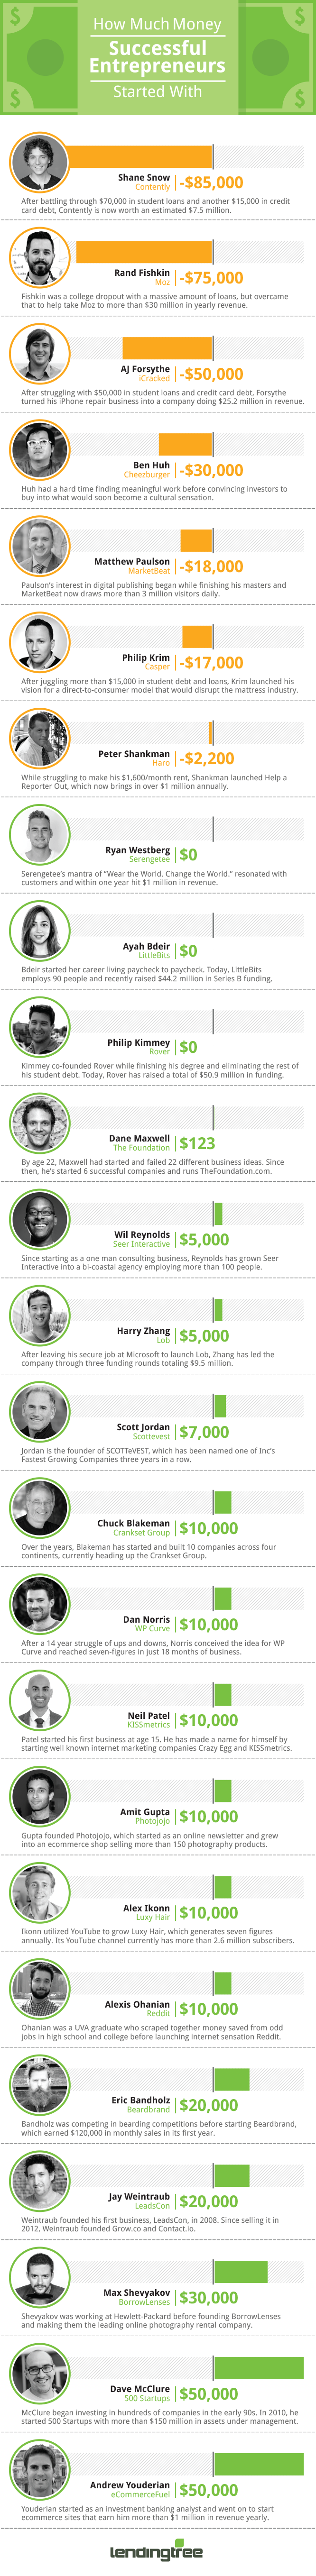 Does It Take Money to Make Money? See What 25 Successful Entrepreneurs